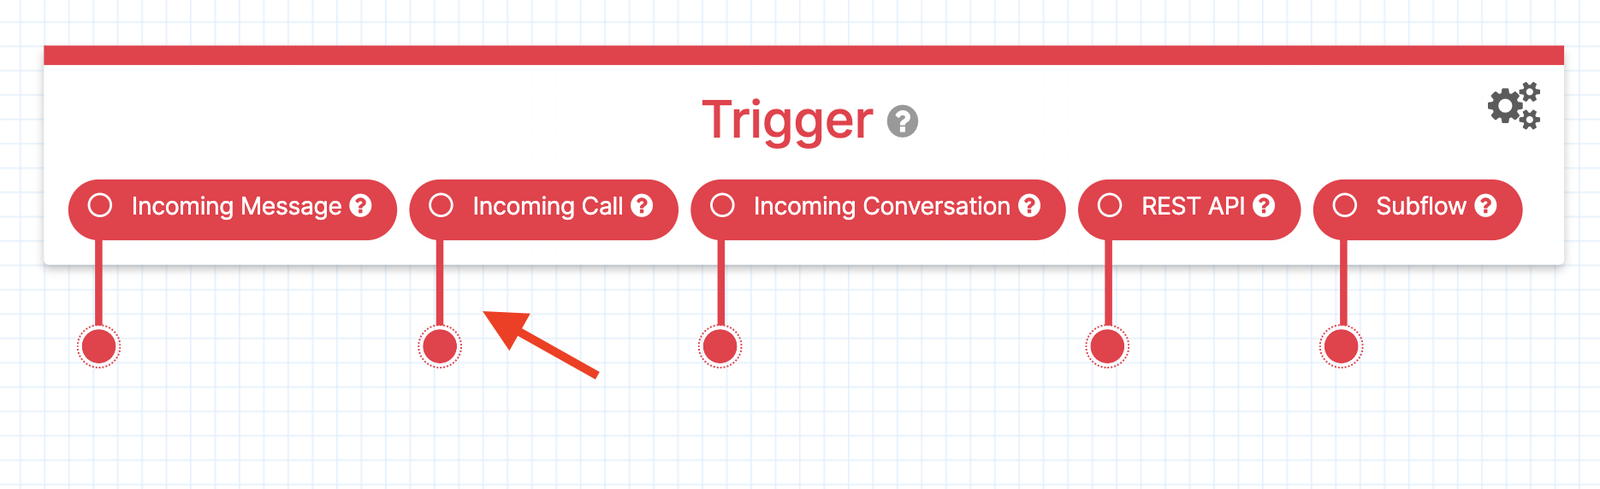 Twilio Studio Tutorial Forward Calls Trigger Widget with arrow pointing to Incoming Call trigger.